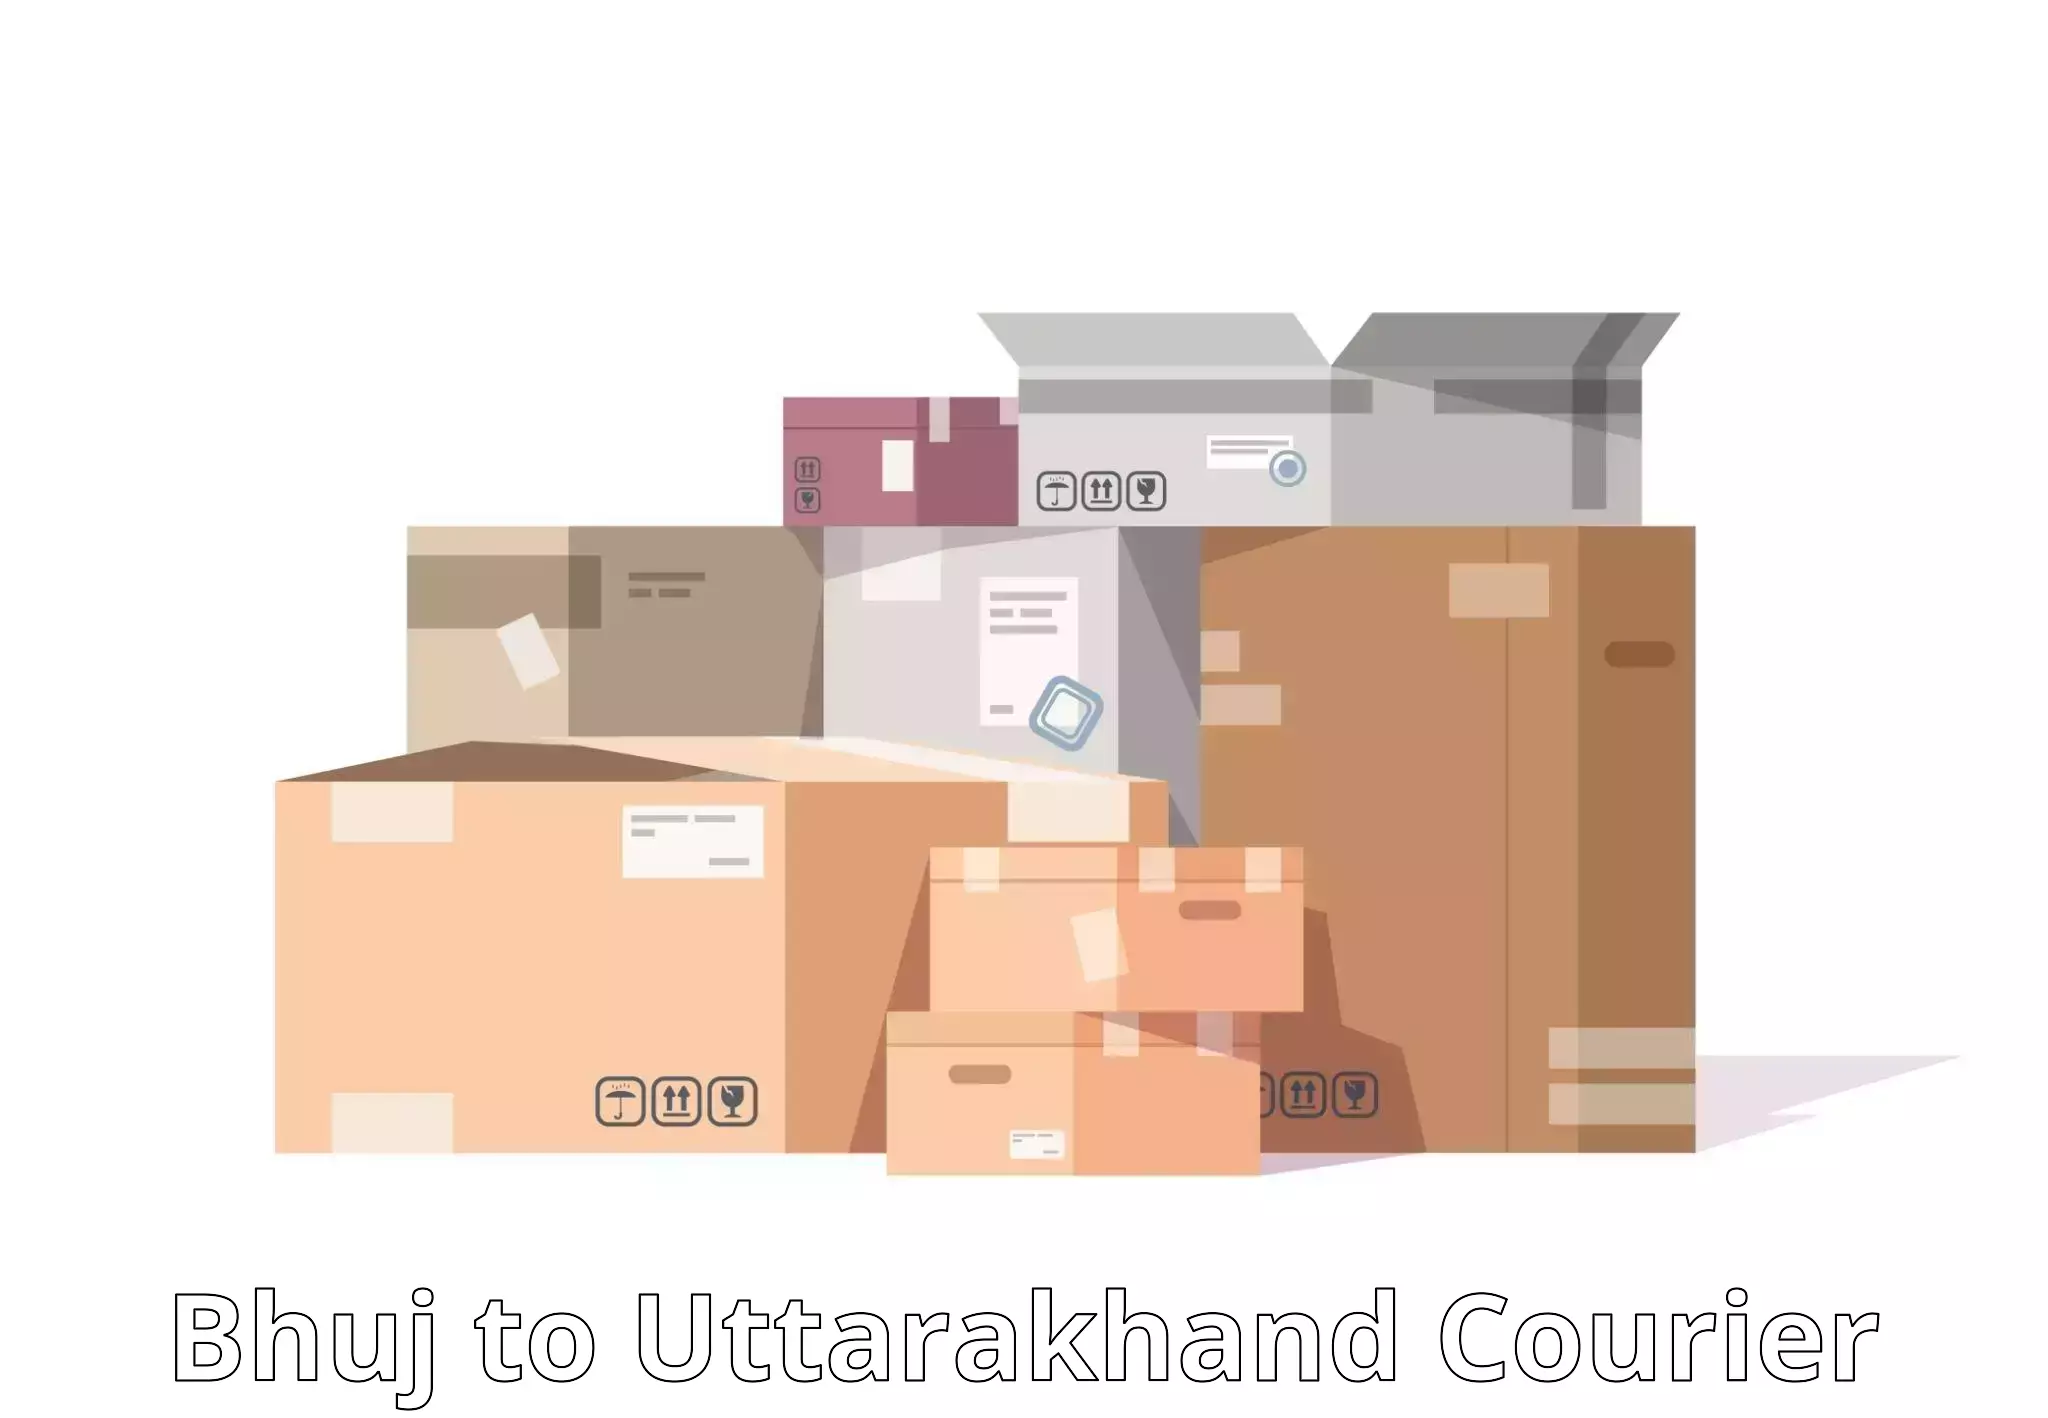 Parcel service for businesses Bhuj to Champawat